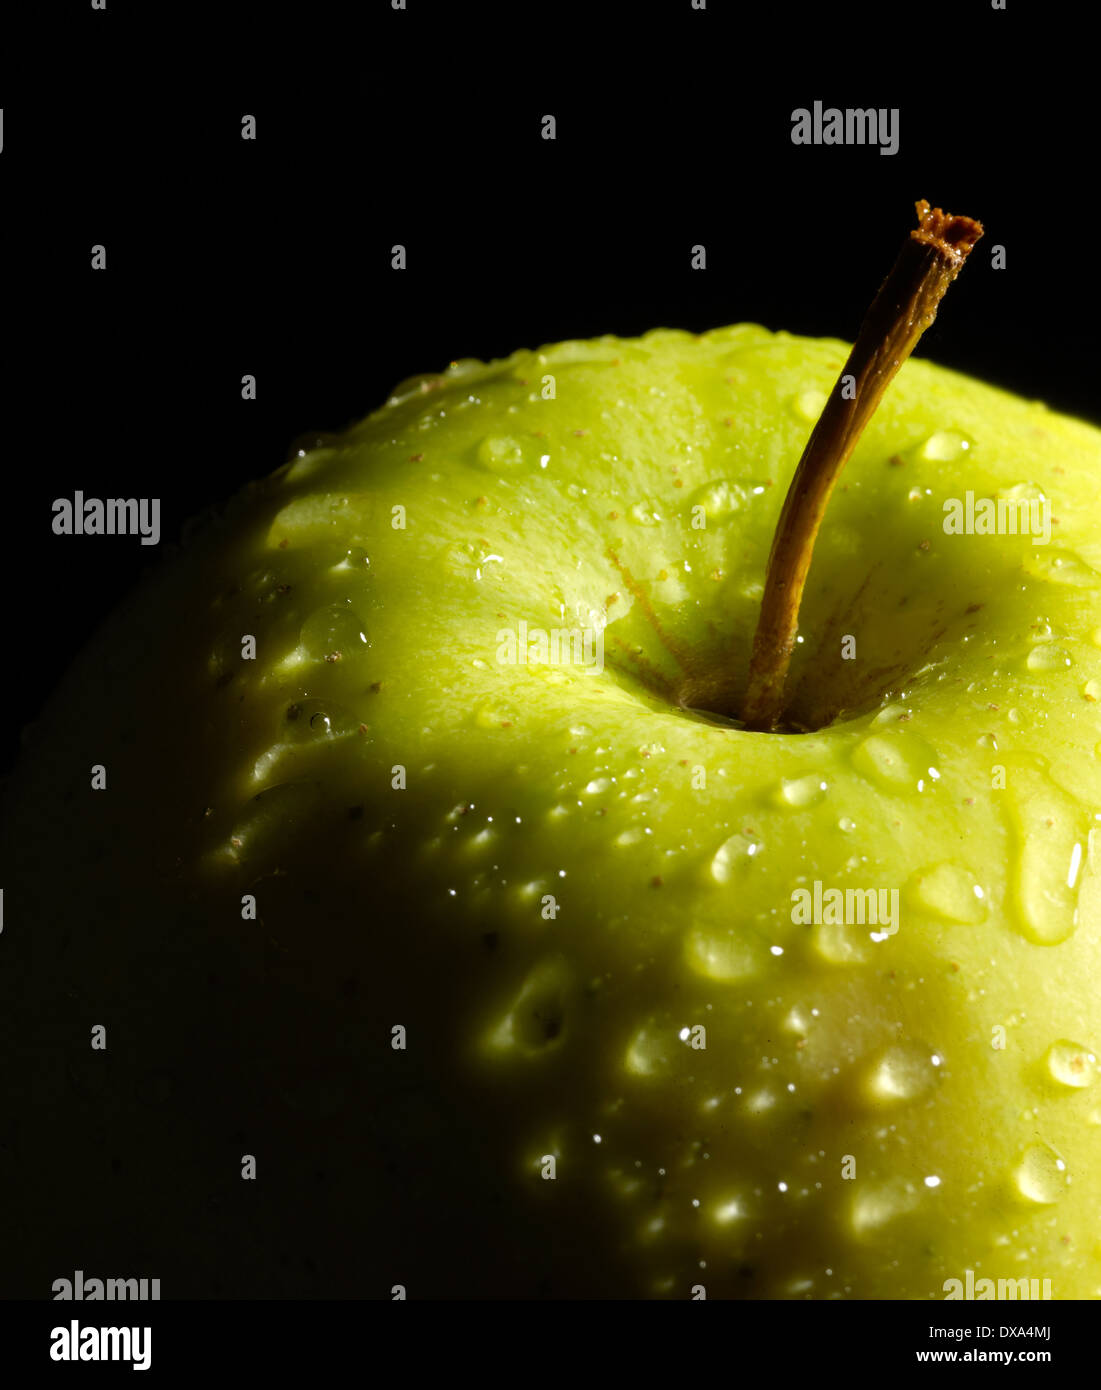 detail of a wet green apple in dark back Stock Photo